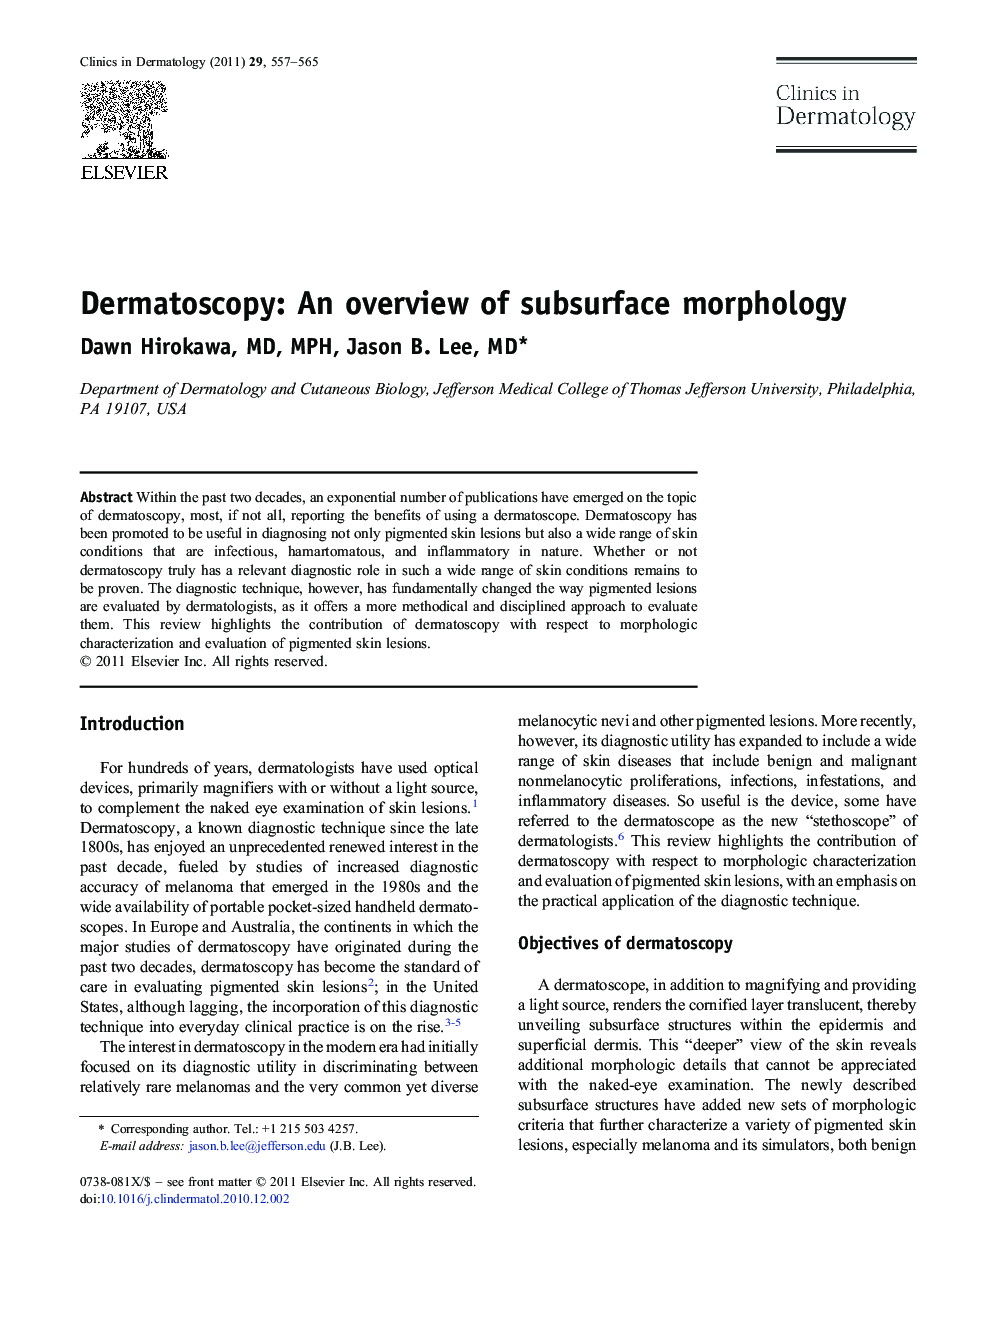 Dermatoscopy: An overview of subsurface morphology